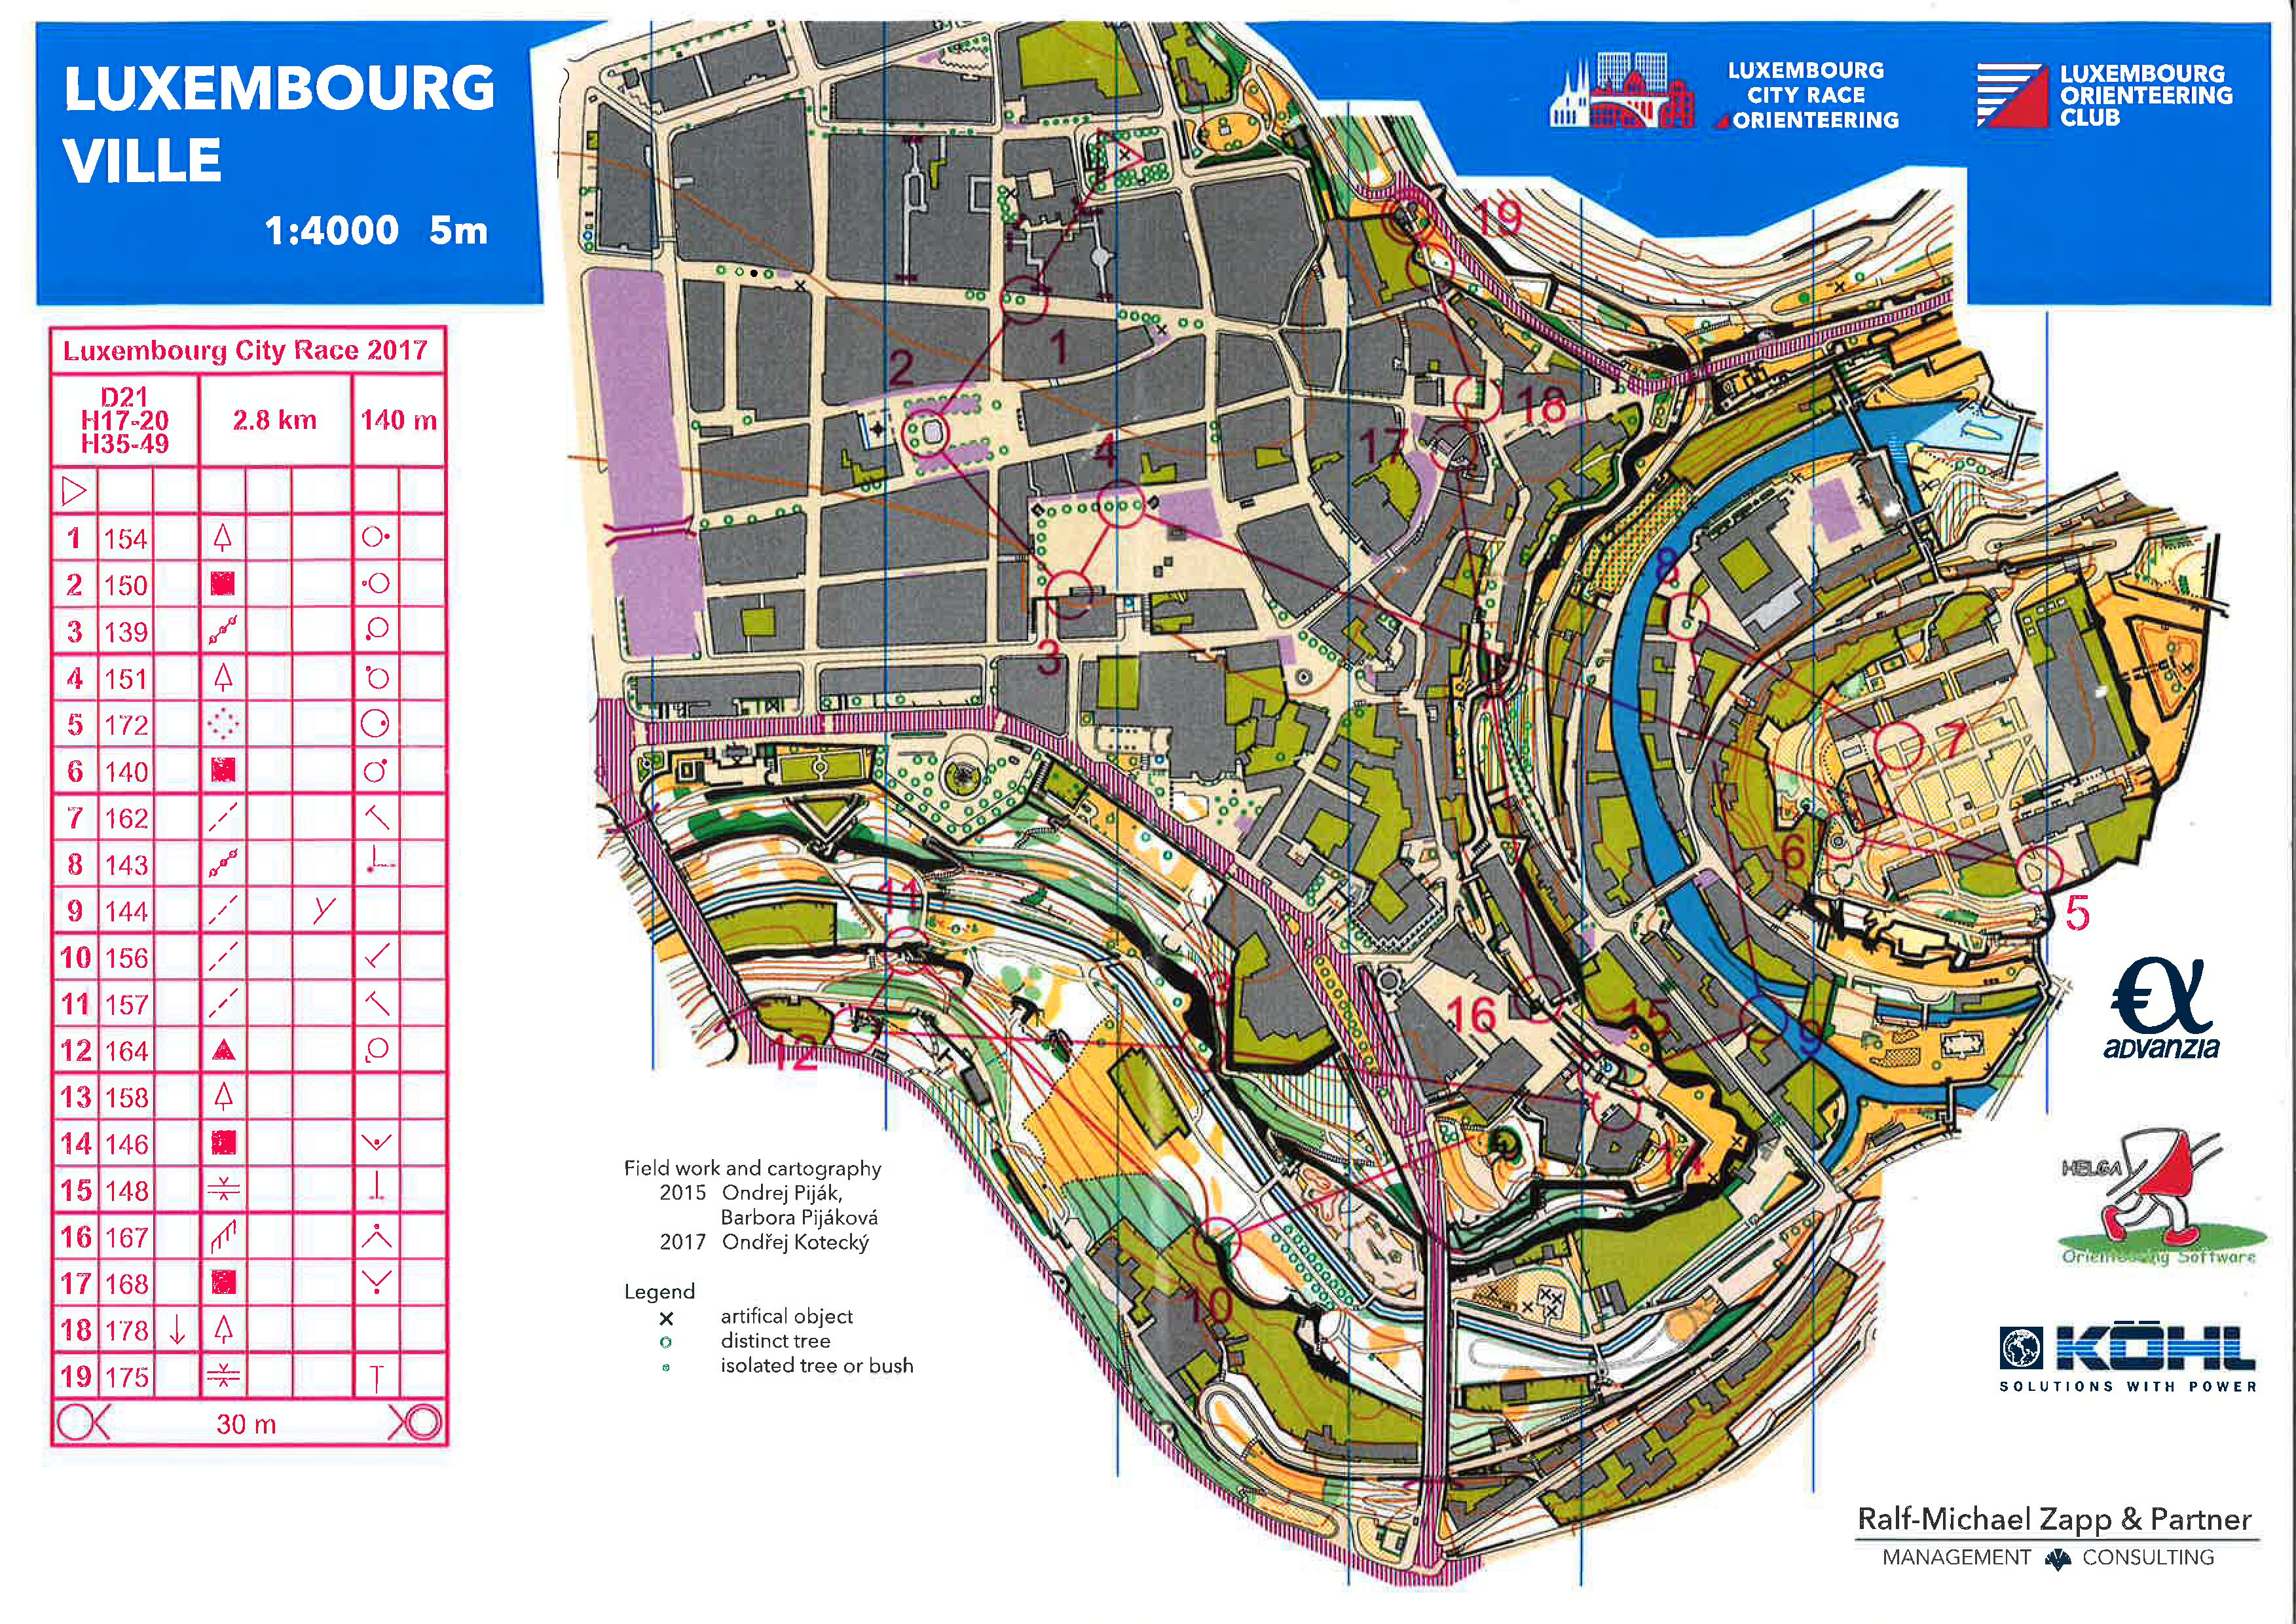 Luxembourg City Race (05-11-2017)